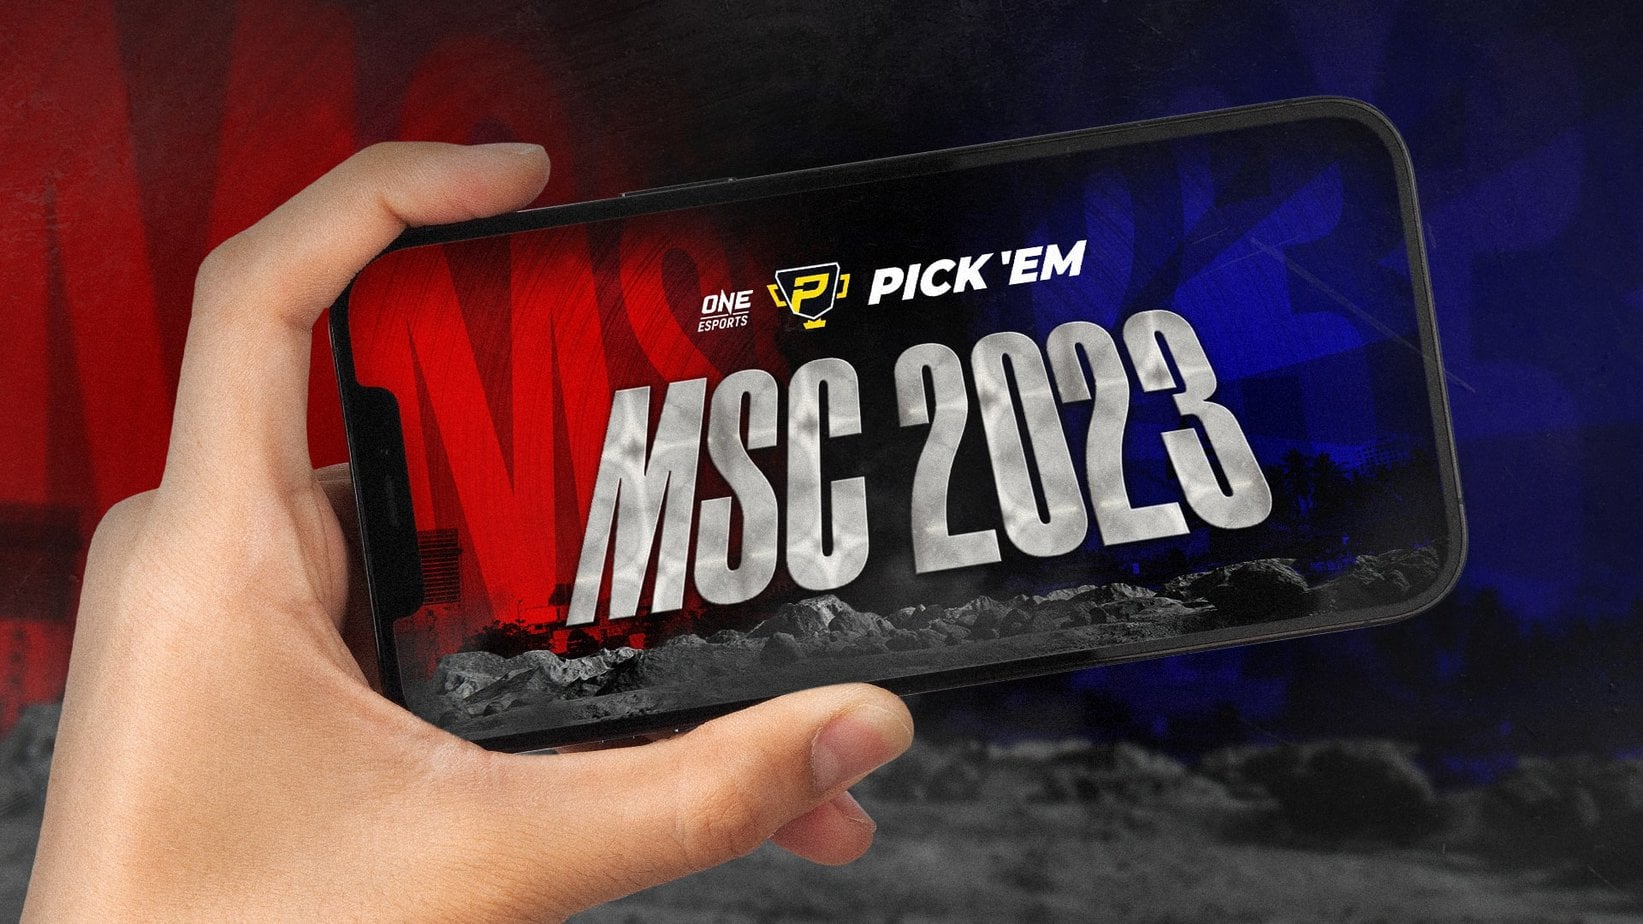 Win up to 3,500 Diamonds in the ONE Esports MSC 2023 Pick ‘Em Challenge - ONE Esports